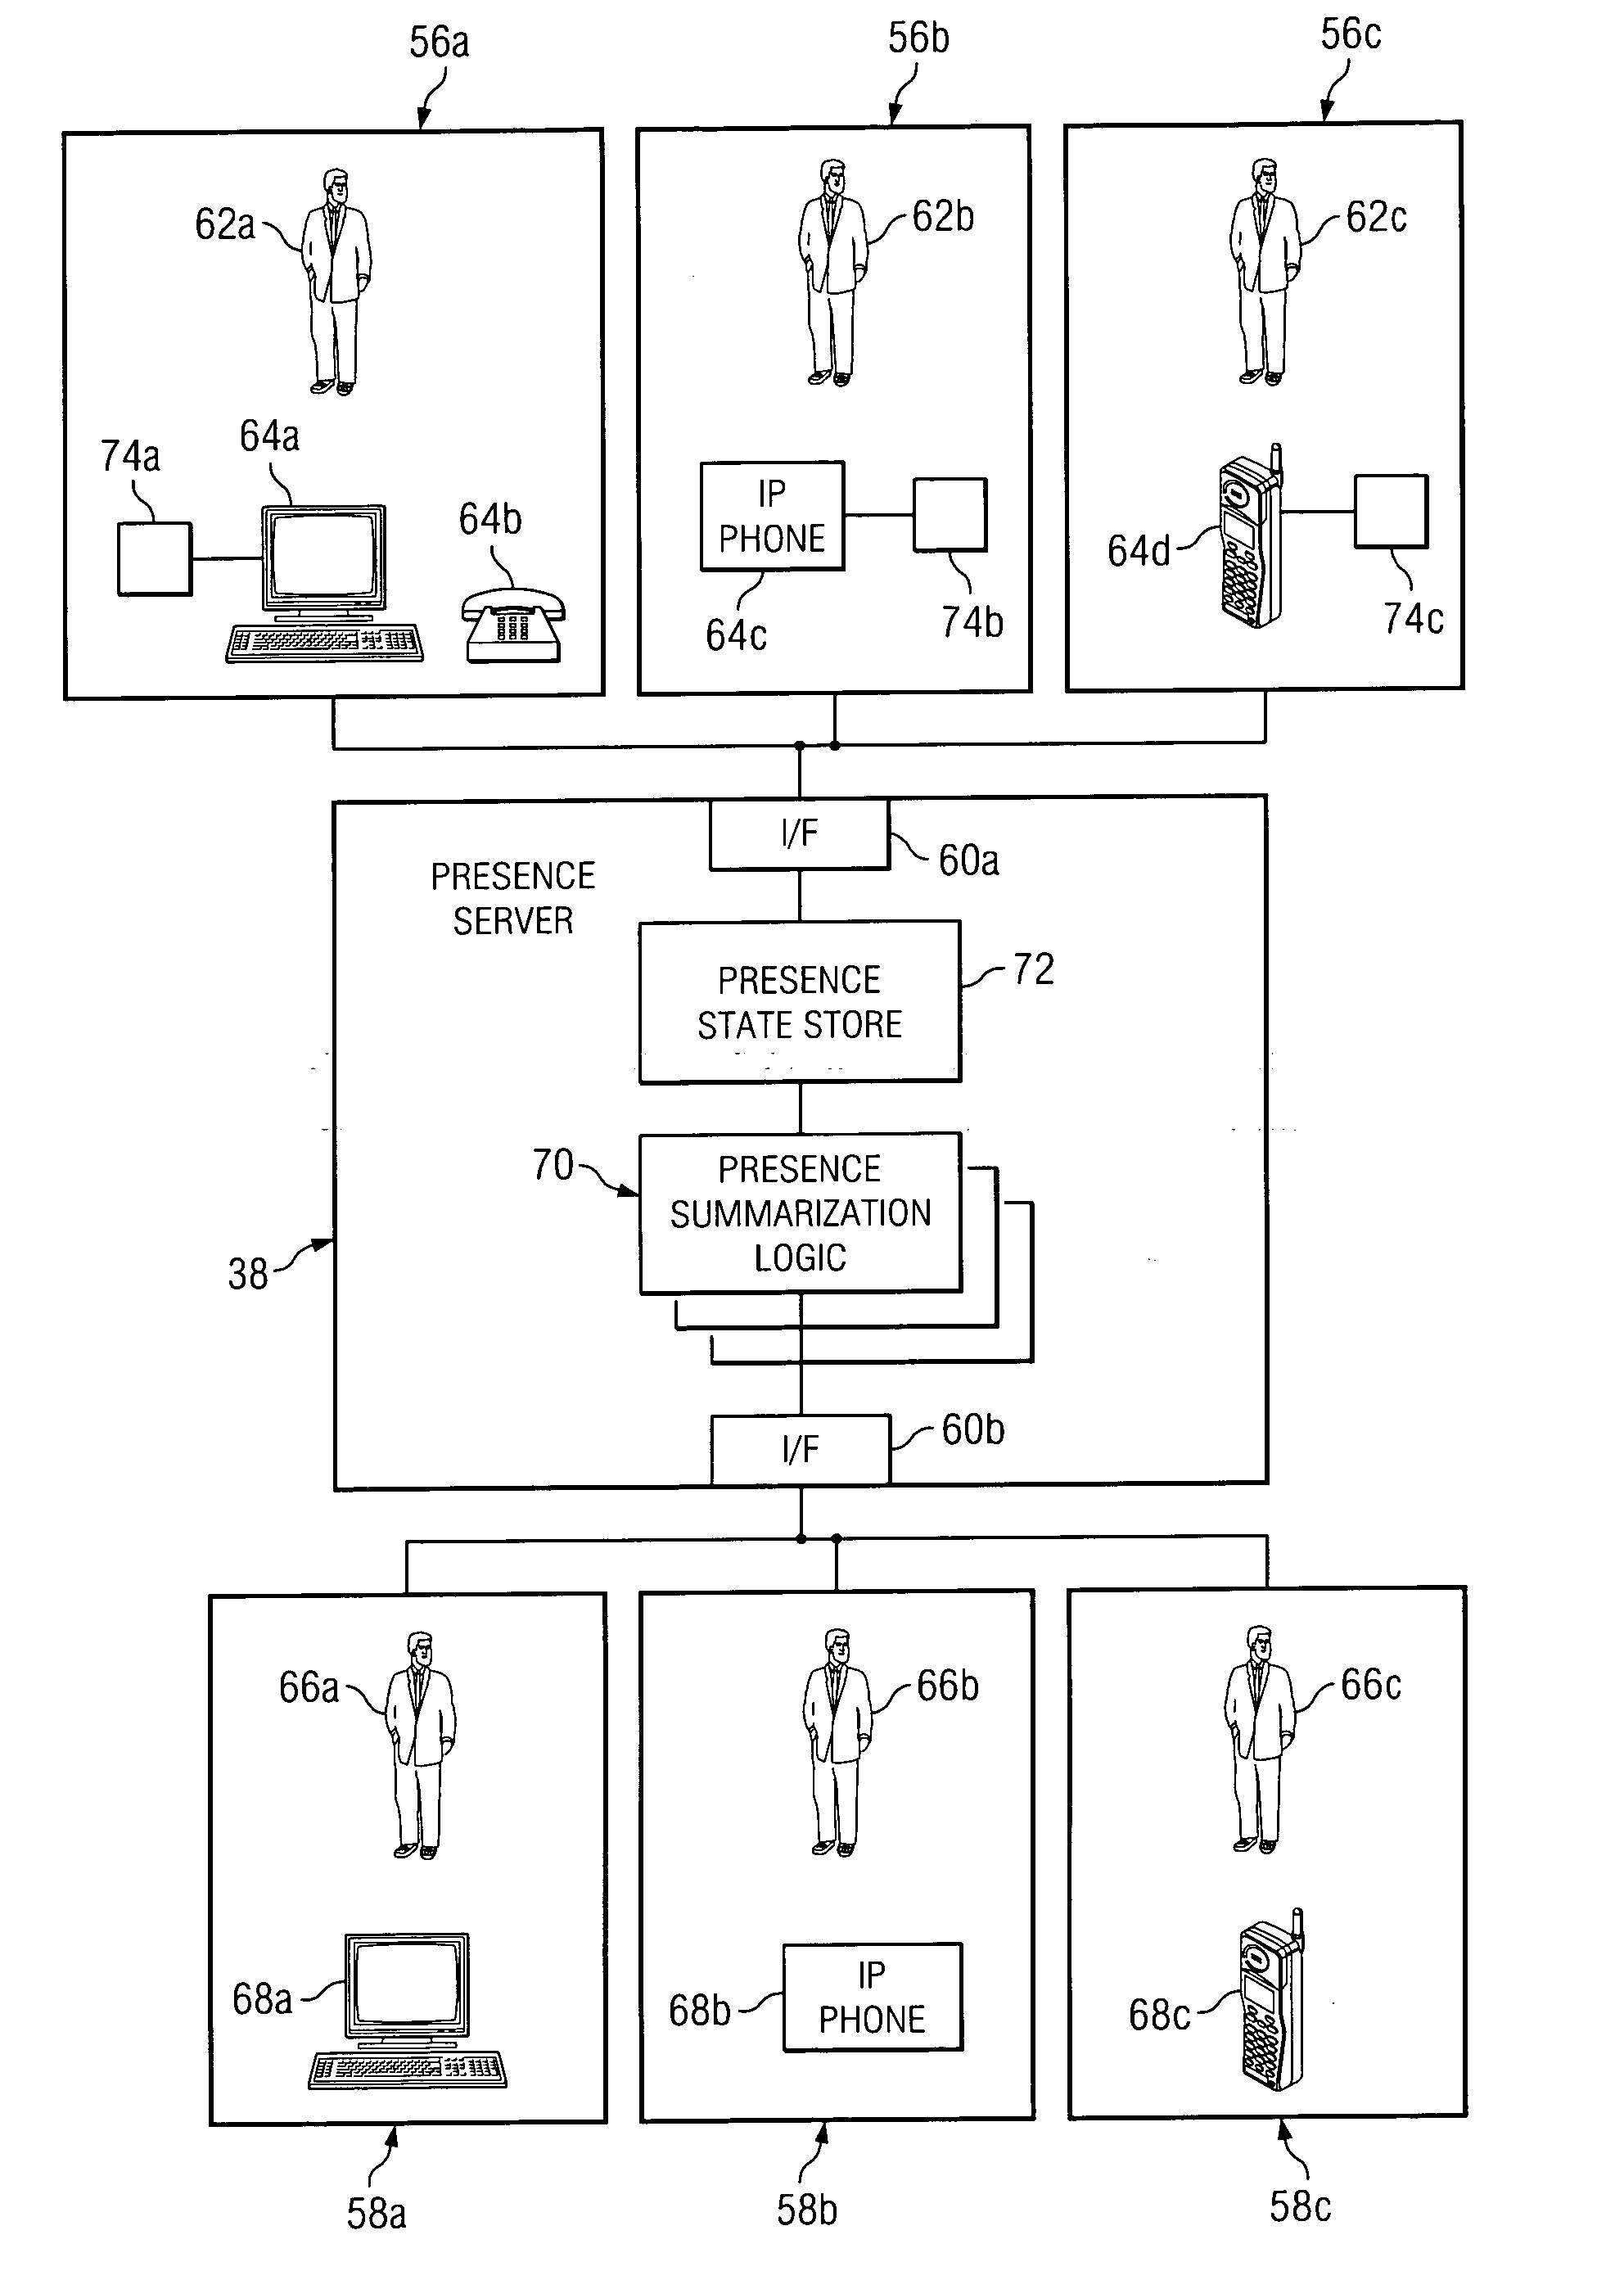 Method and system to protect the privacy of presence information for network users